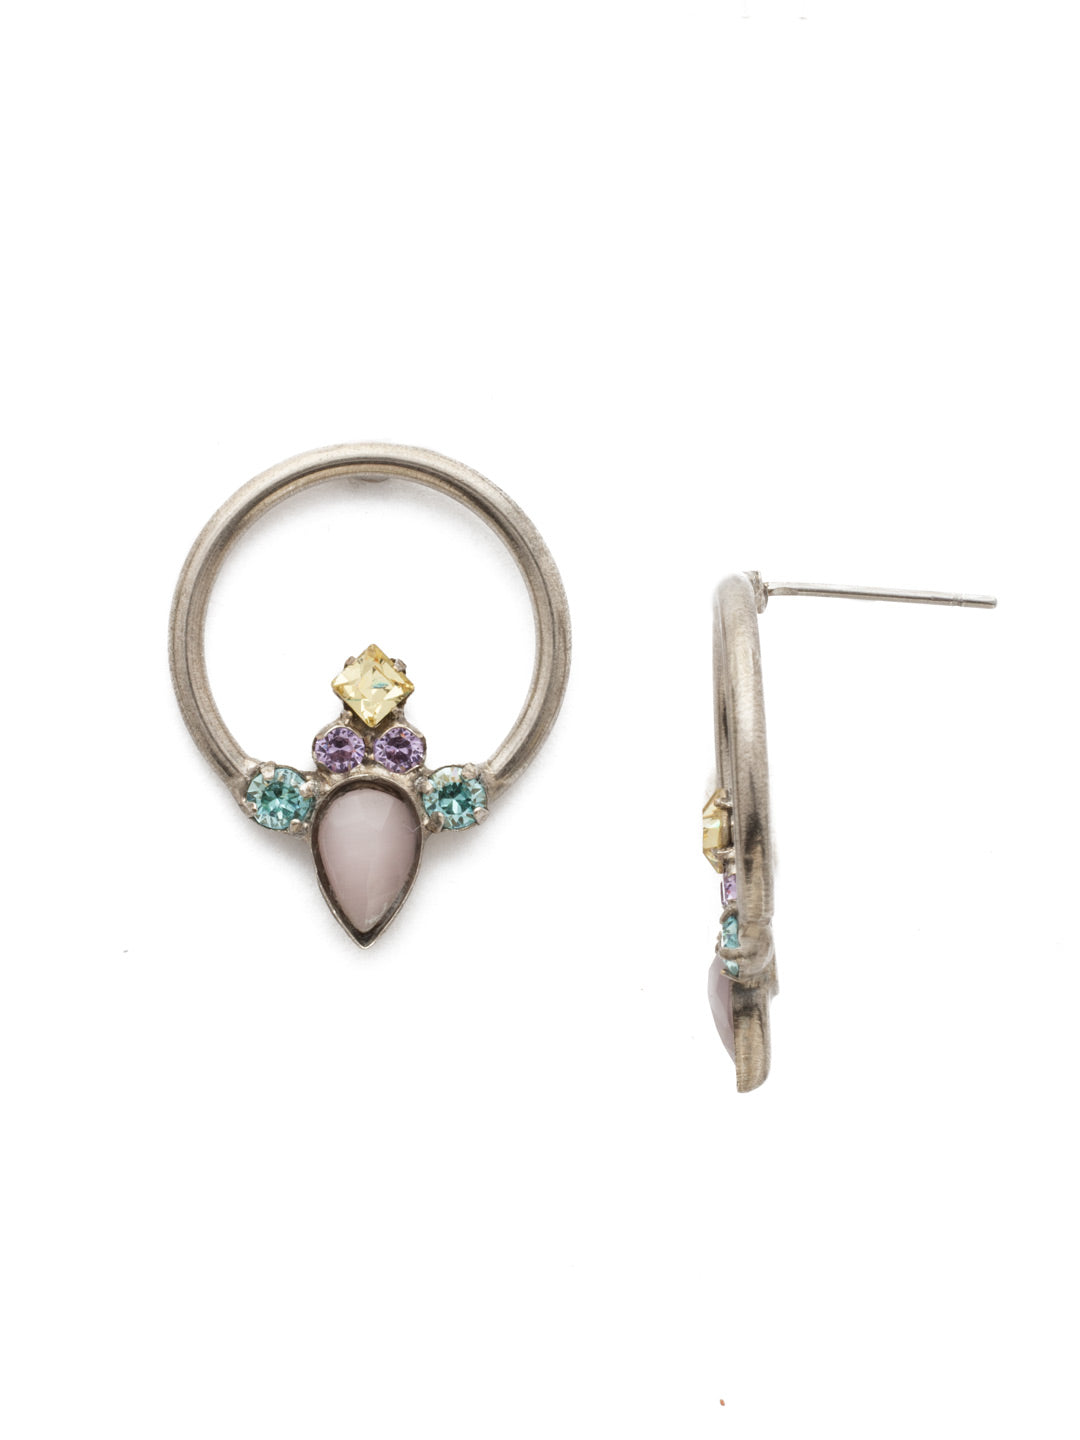 EDU43 Post Earrings - EDU43ASLPA - <p>Features an assortment of symmetrical square and round crystals surrounding a pear crystal and completed with a metal loop. From Sorrelli's Lilac Pastel collection in our Antique Silver-tone finish.</p>